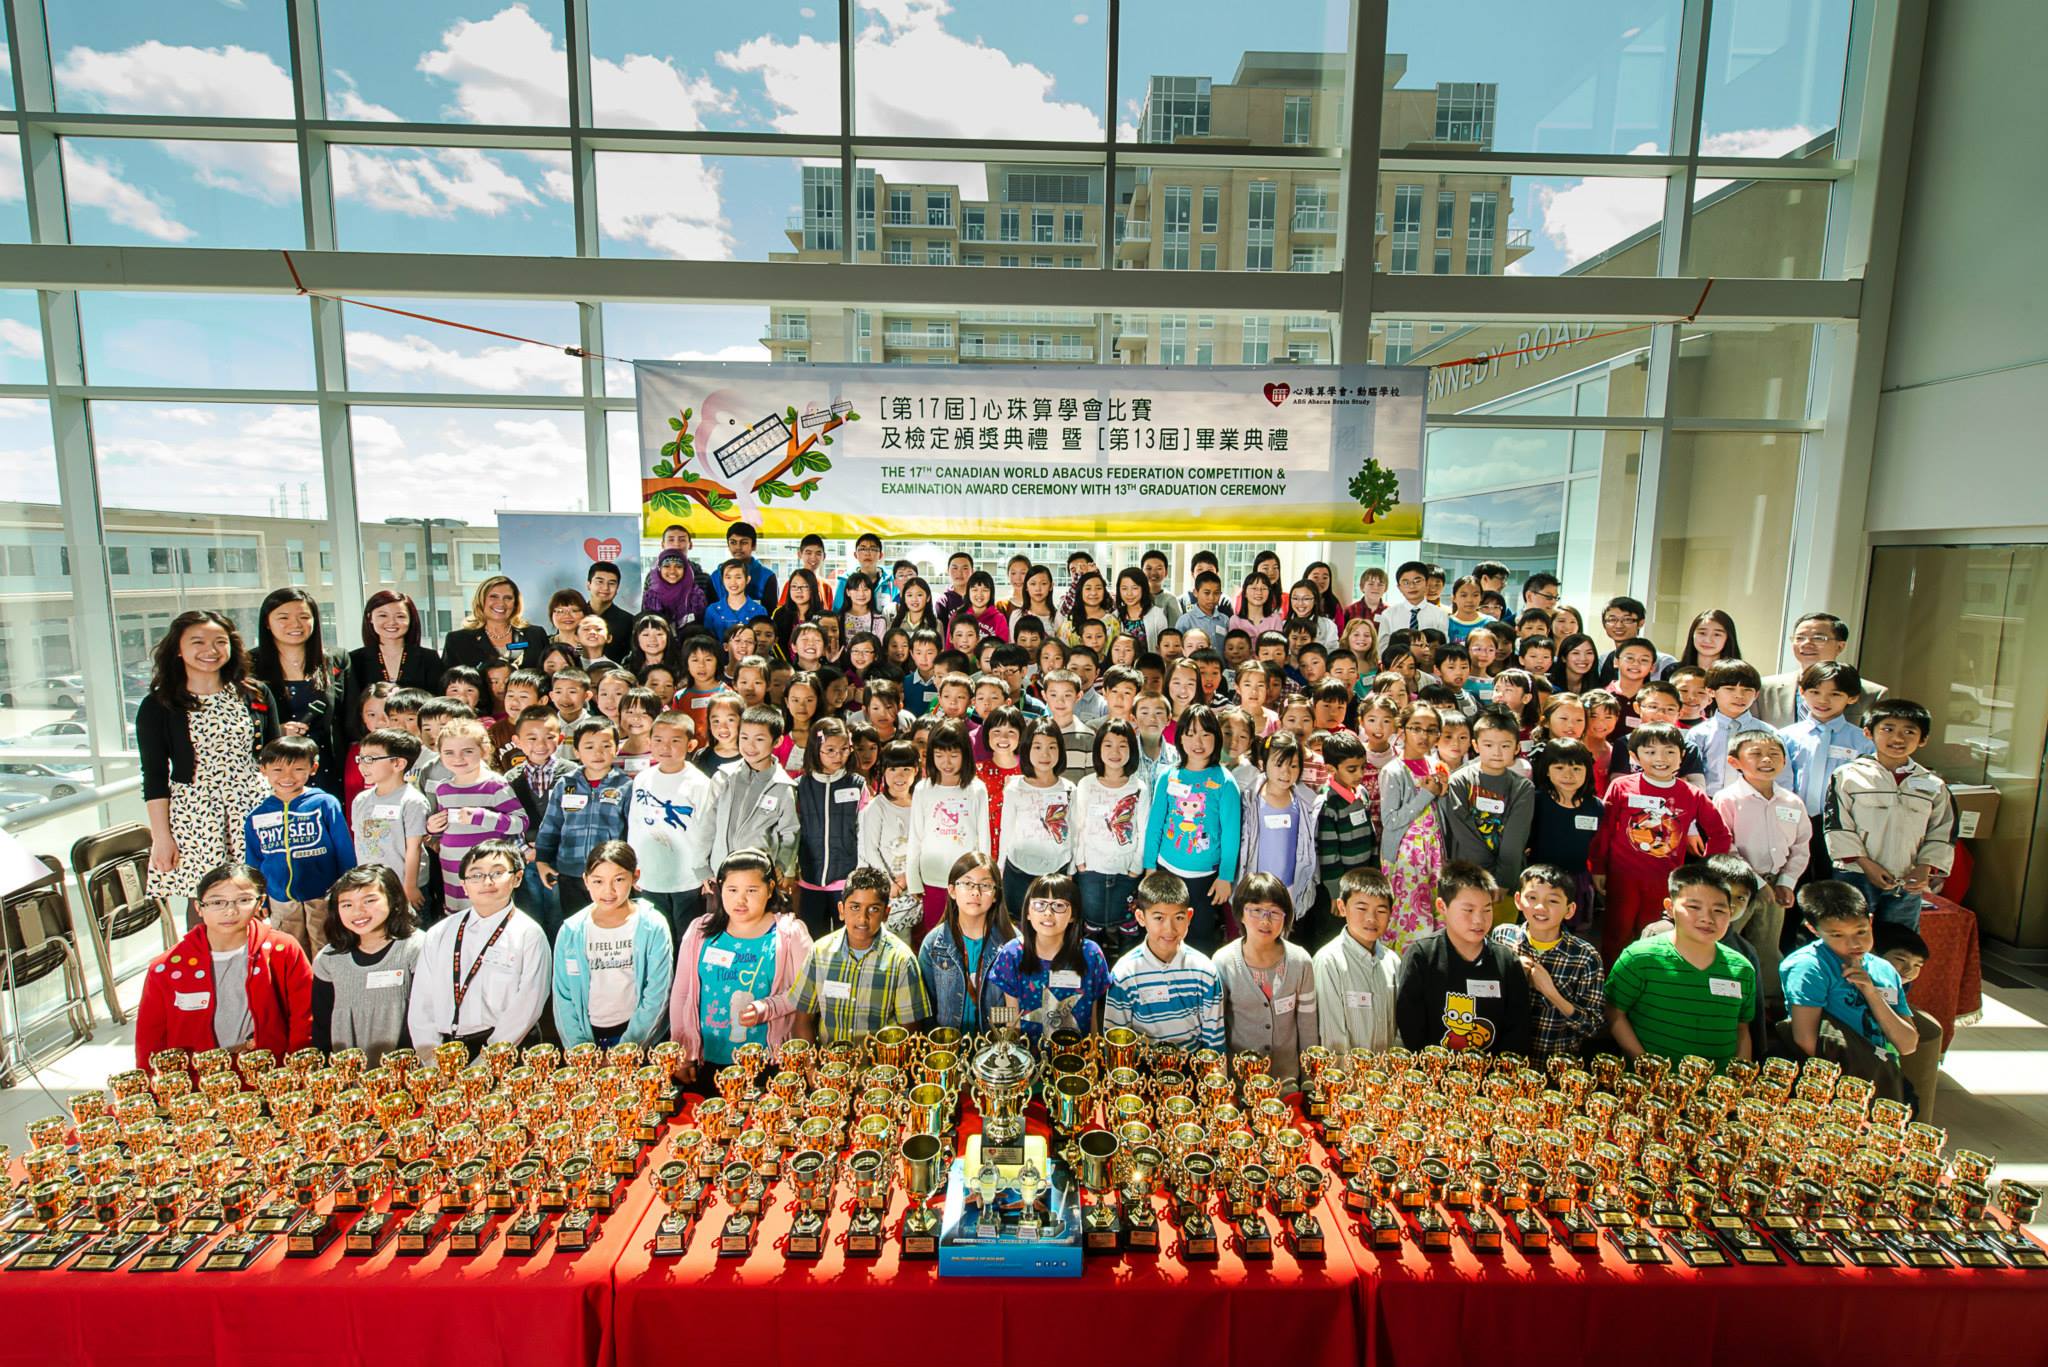 Our 17th Canadian Competition & Graduation Ceremony (May 2014)